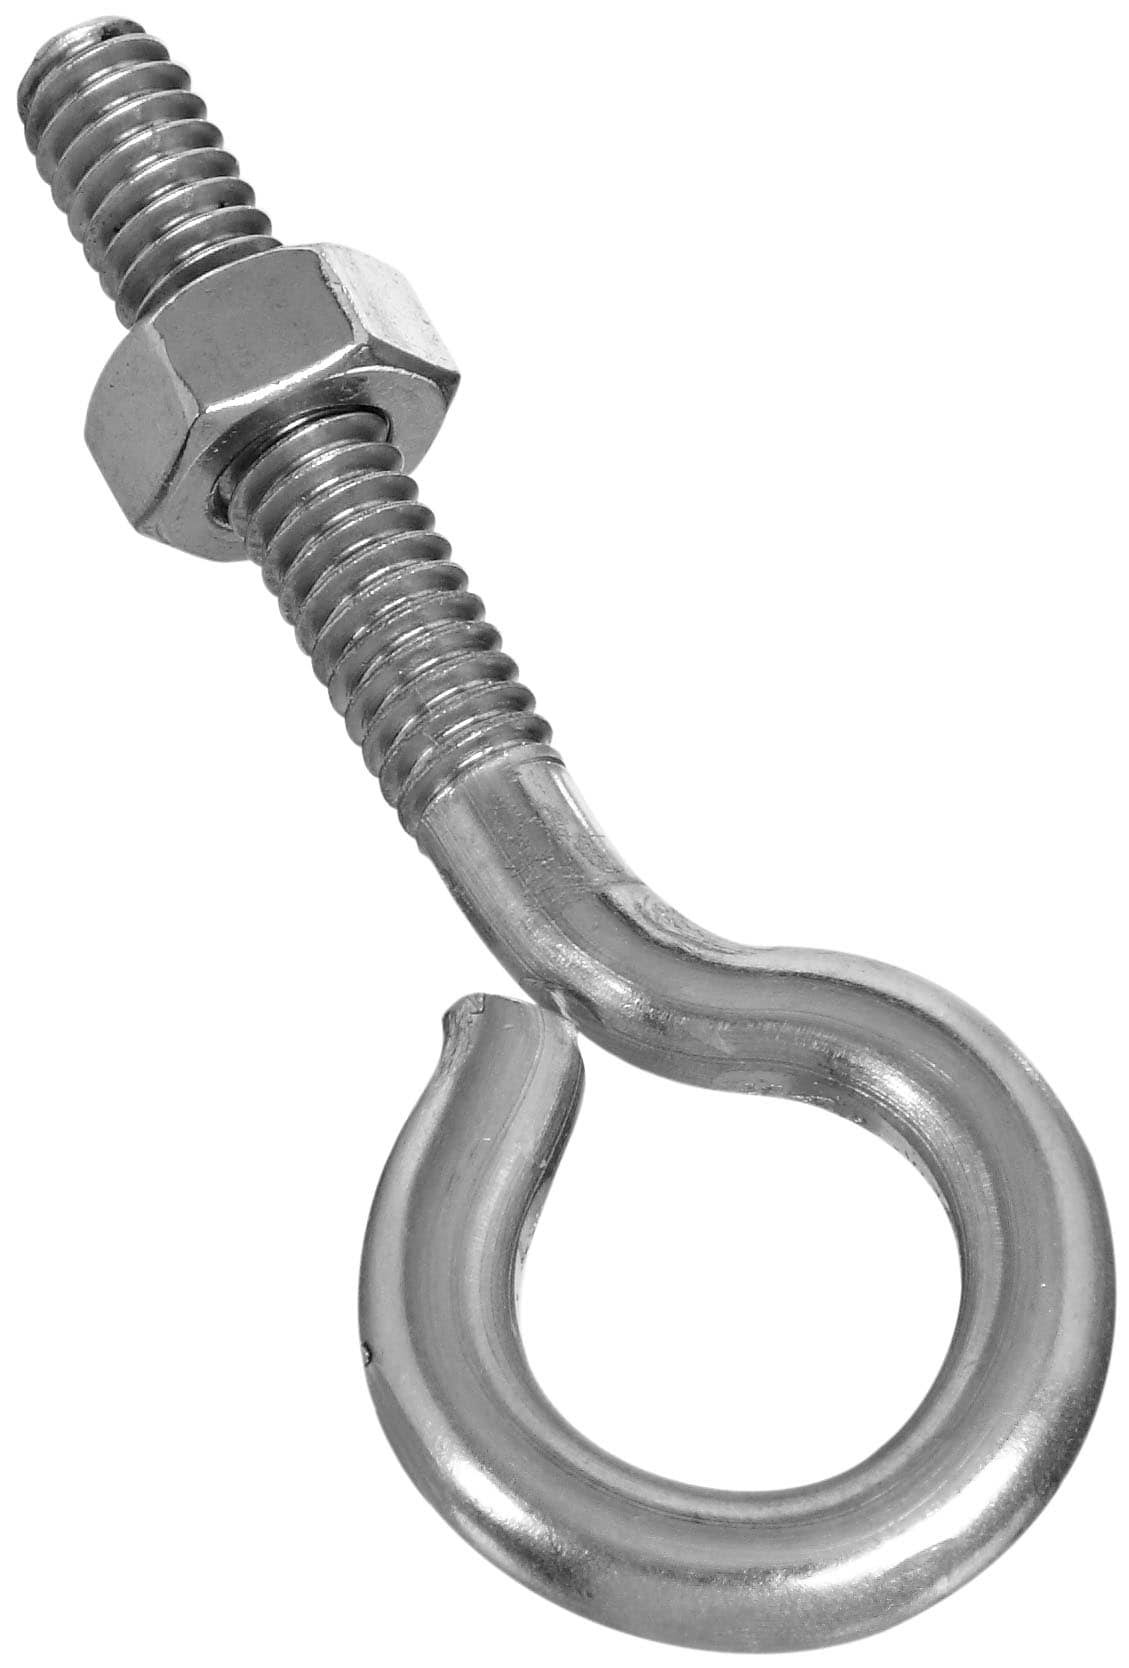 Stanley National Hardware Eye Bolt with Hex Nut